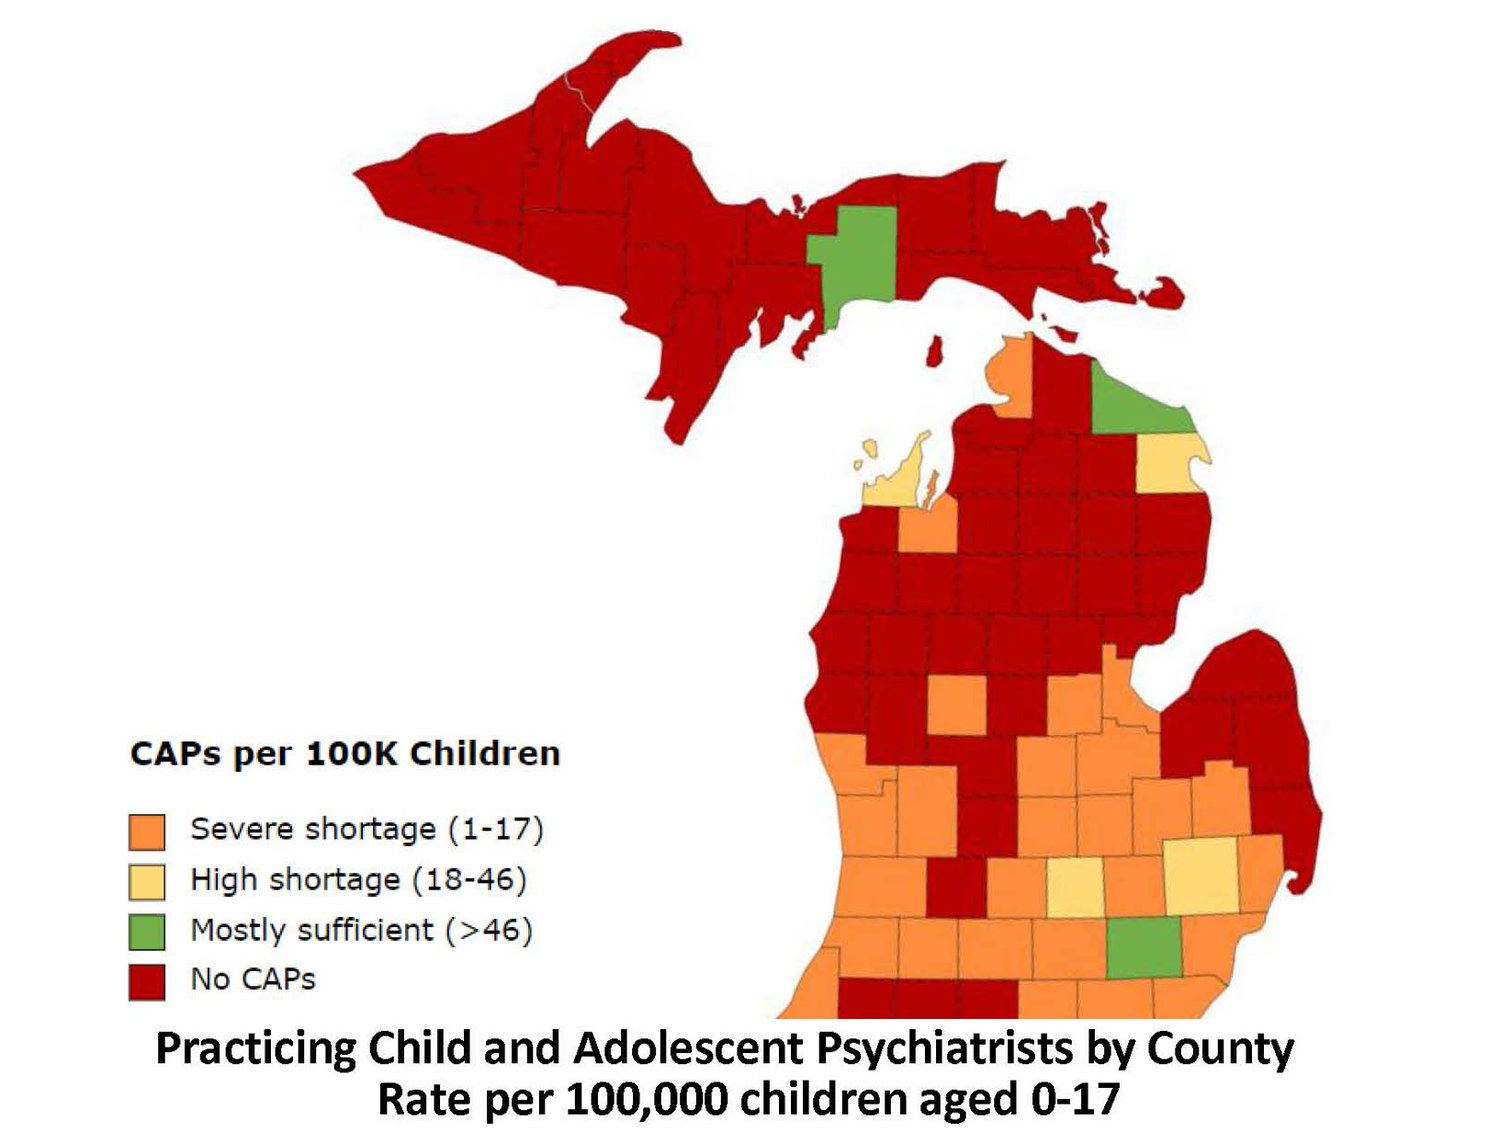 This map shows that Ingham County has a “high shortage” of child and adolescent psychiatrists, according to the American Academy of Child and Adolescent Psychiatrists, which says the county has 14.